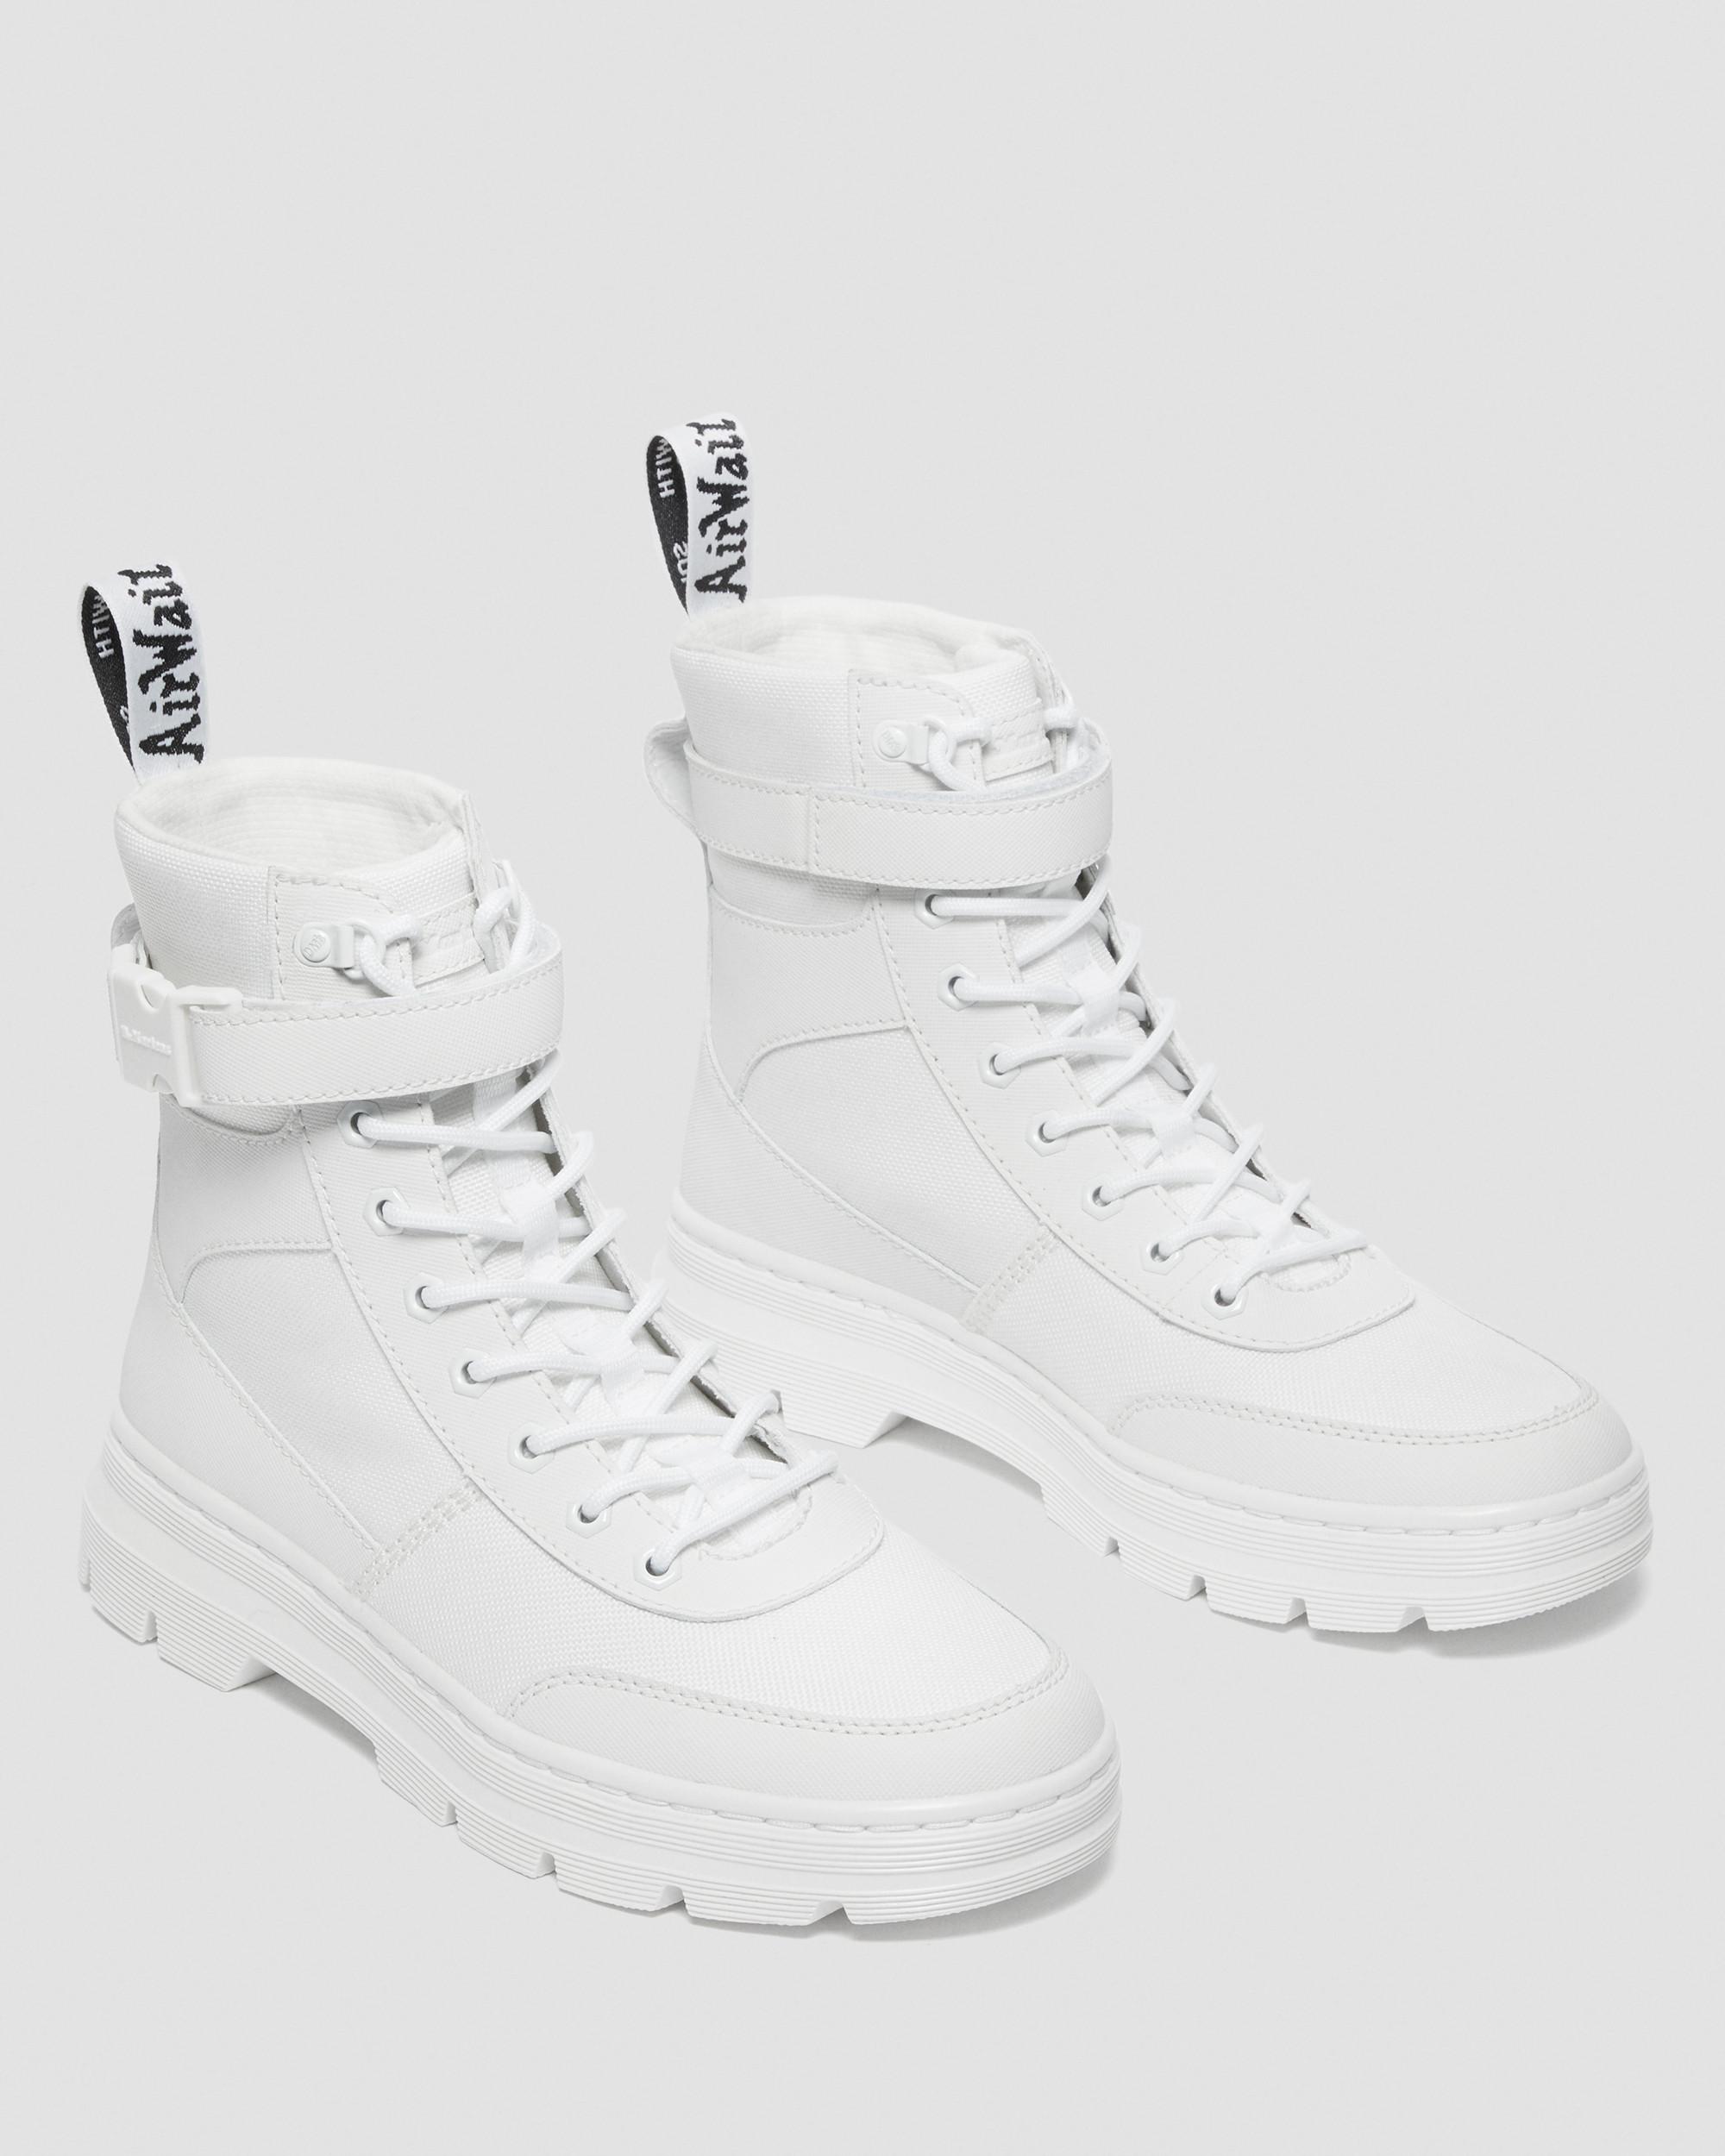 Combs Tech Utility Boots in White | Dr. Martens